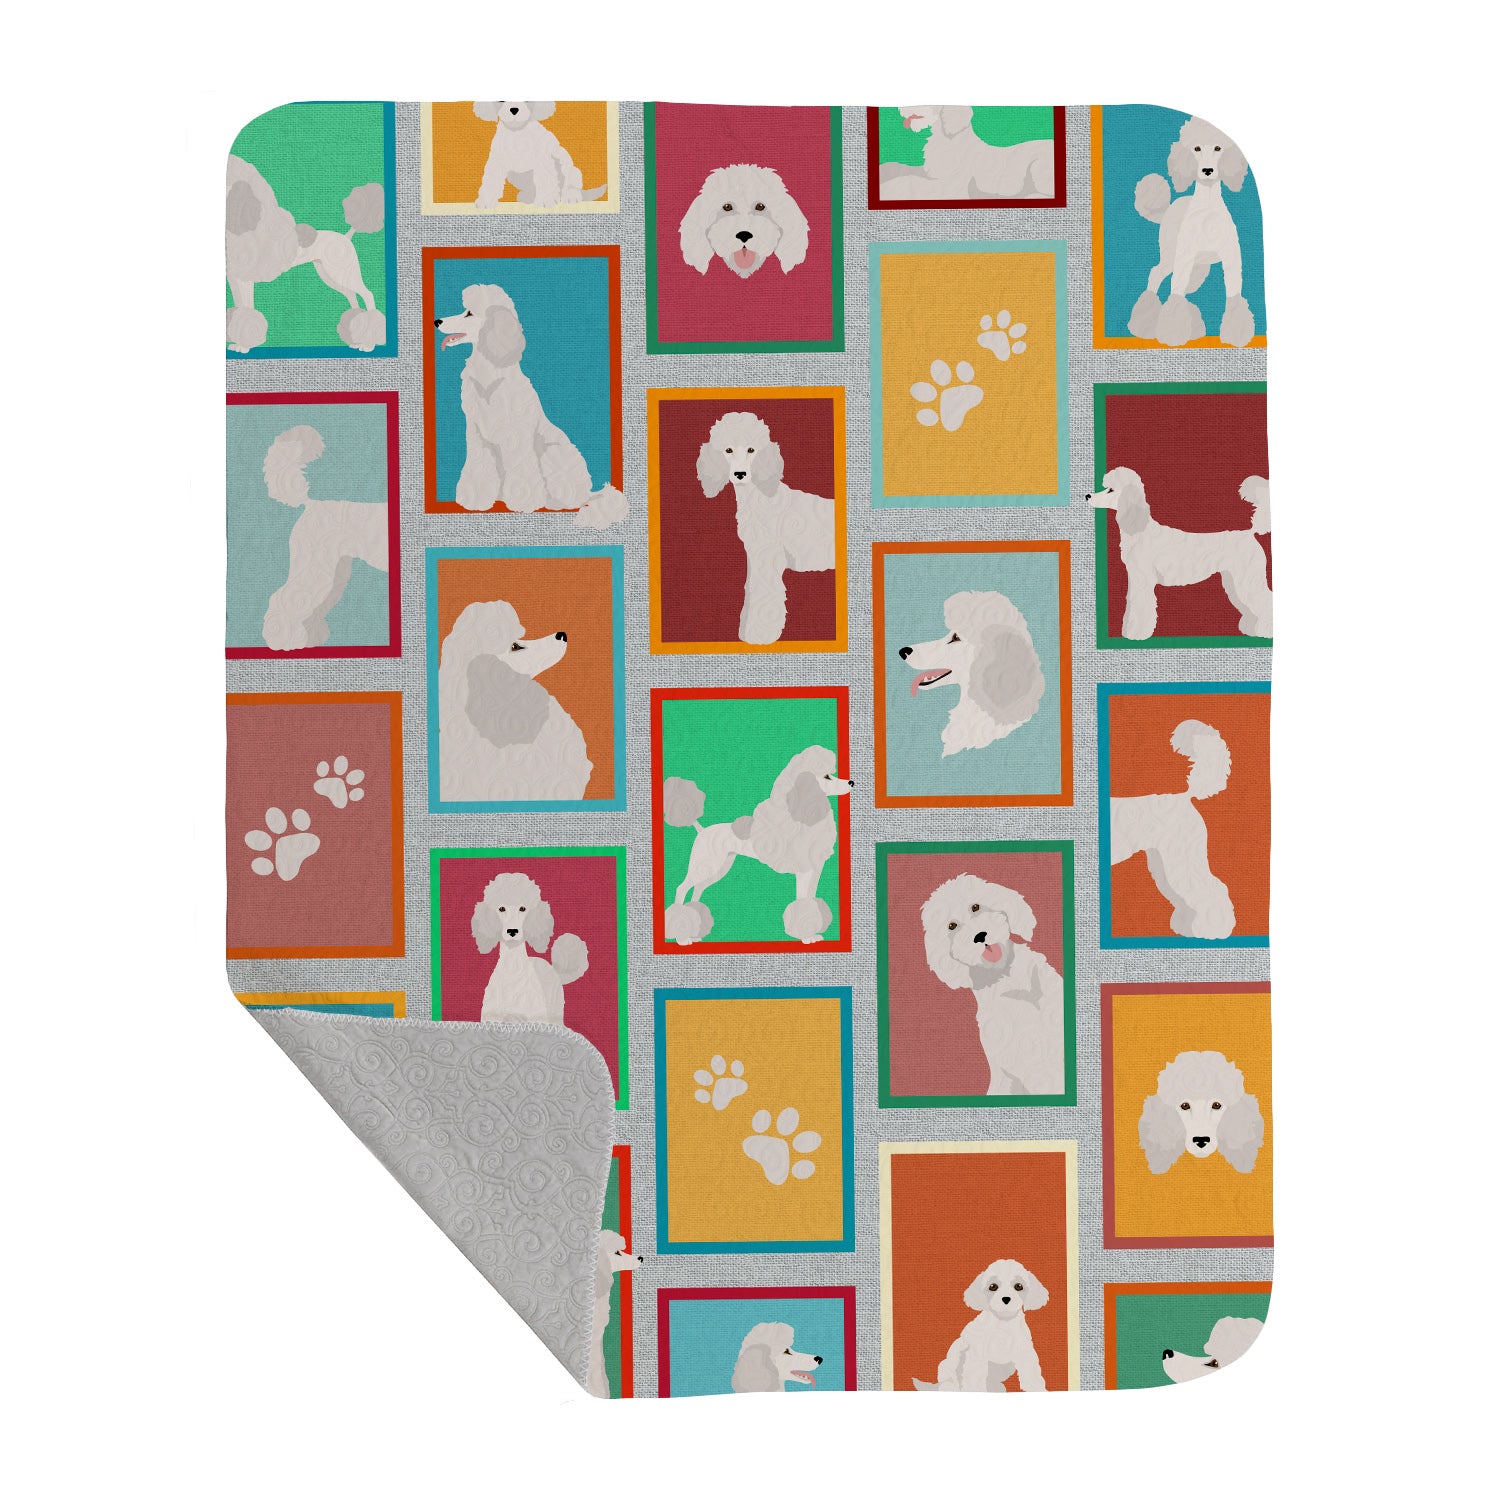 Buy this Lots of White Standard Poodle Quilted Blanket 50x60